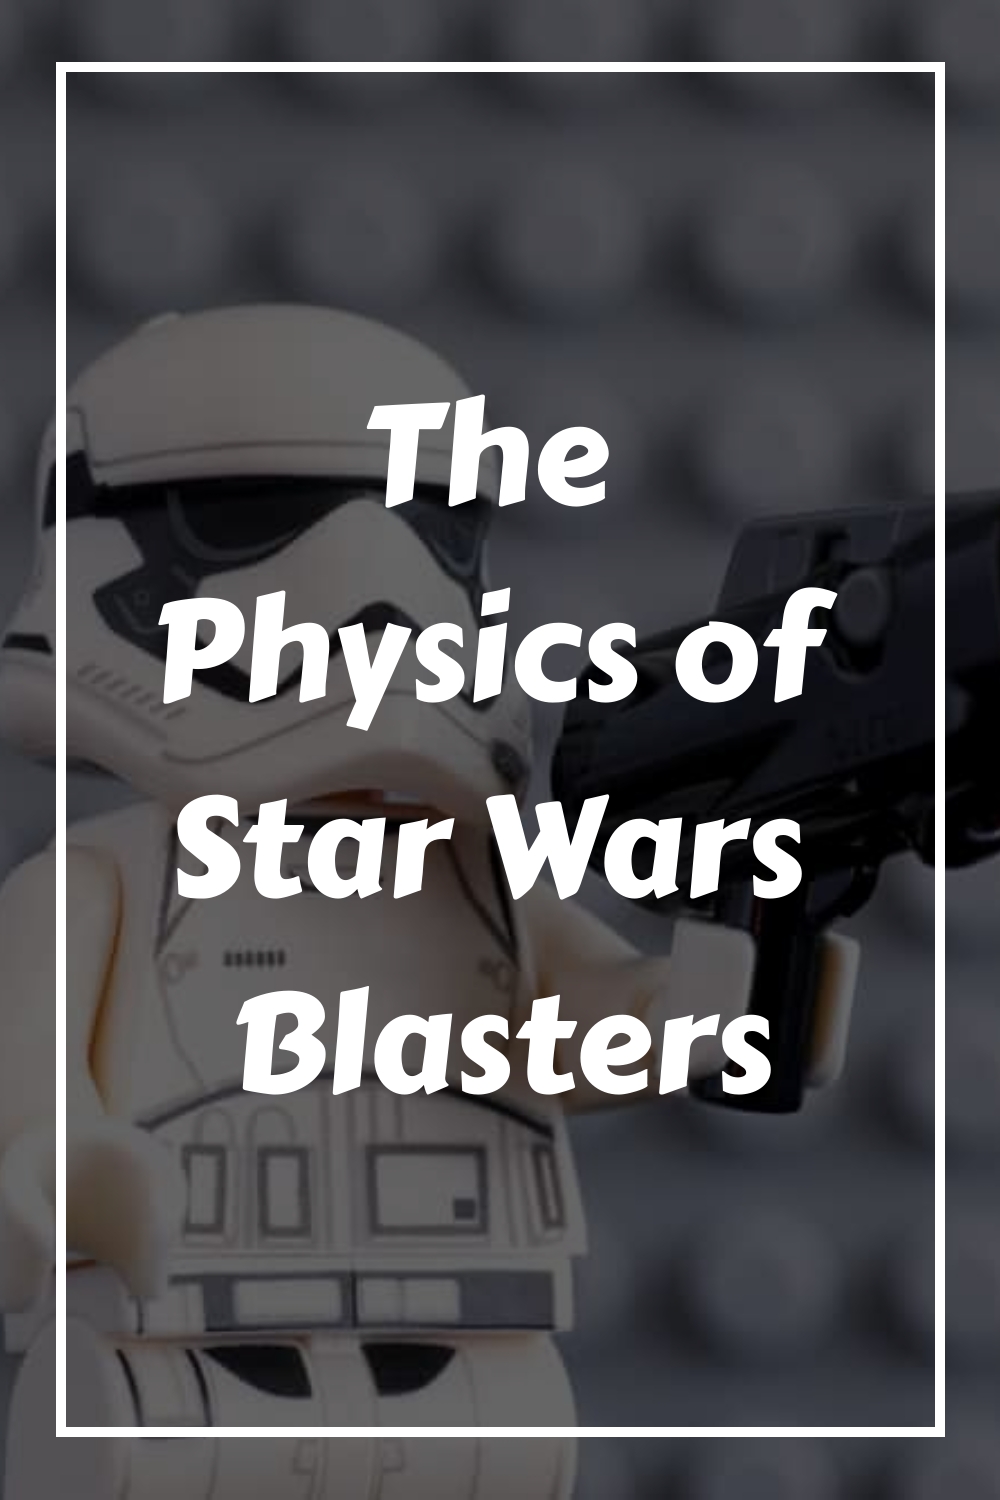 The Physics of Star Wars Blasters generated pin 56104